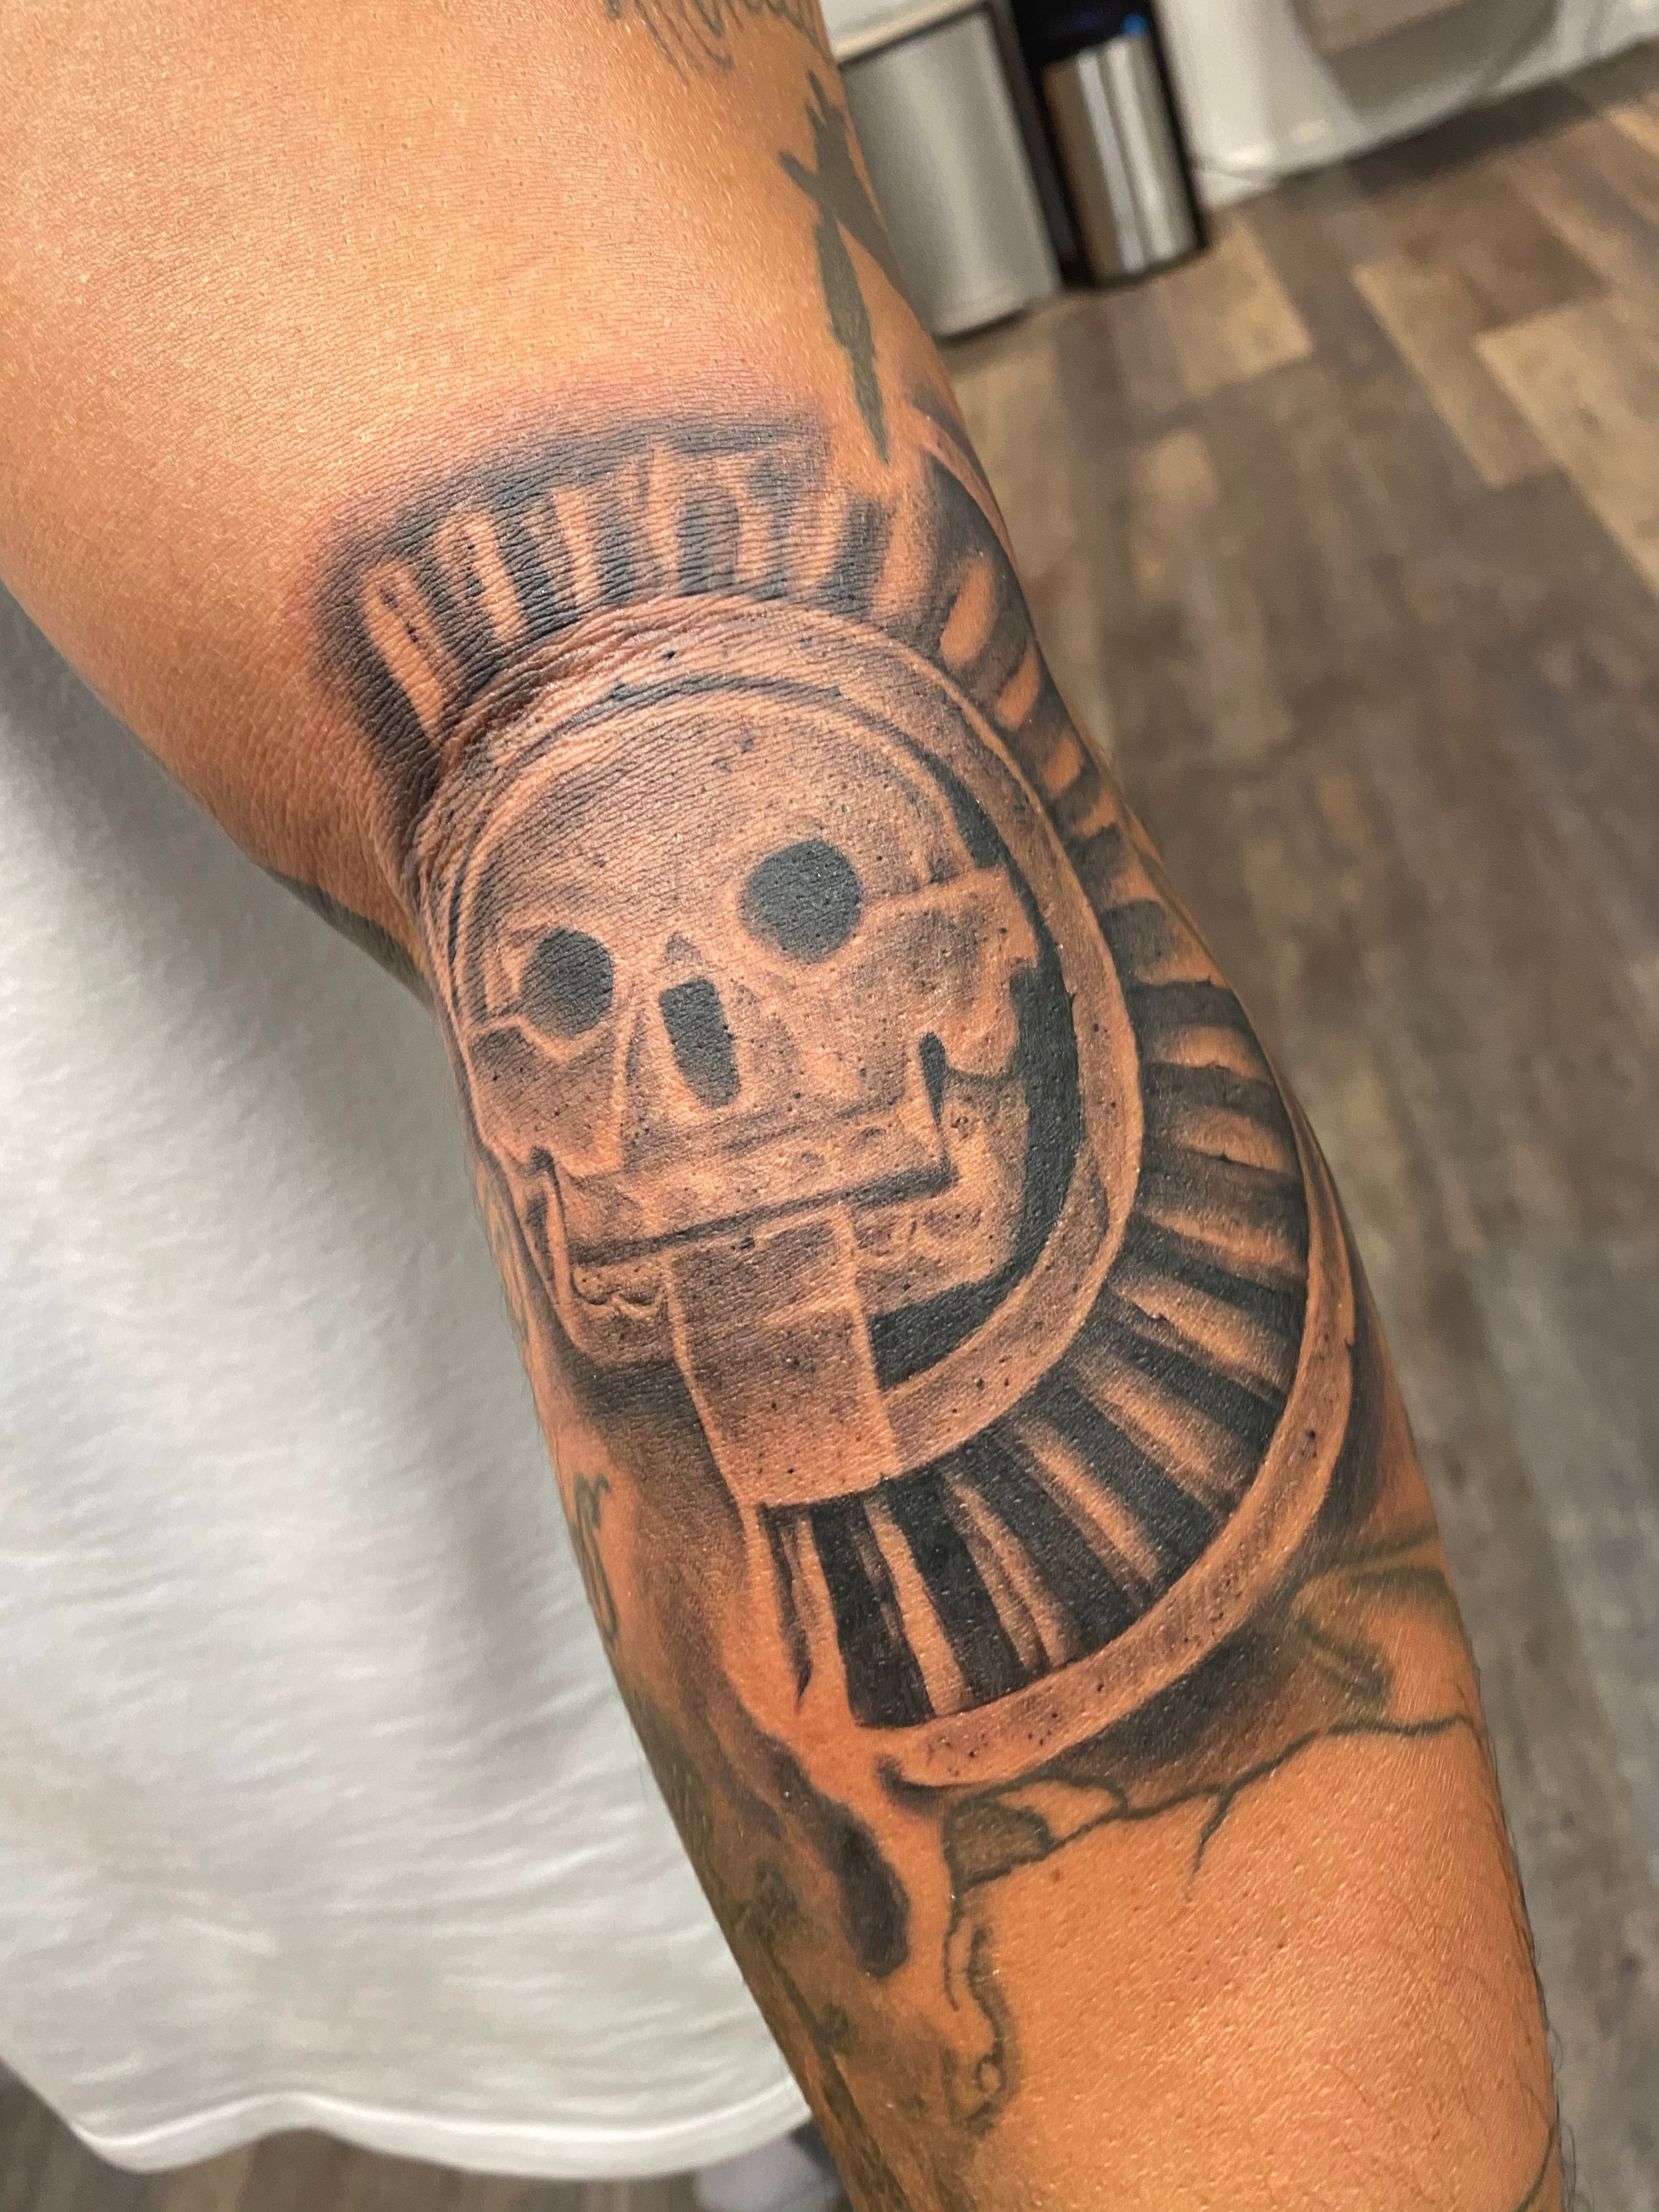 Aztec Tribal Tattoo Sleeve Ideas  Everything You Need To Know  Know World  Now